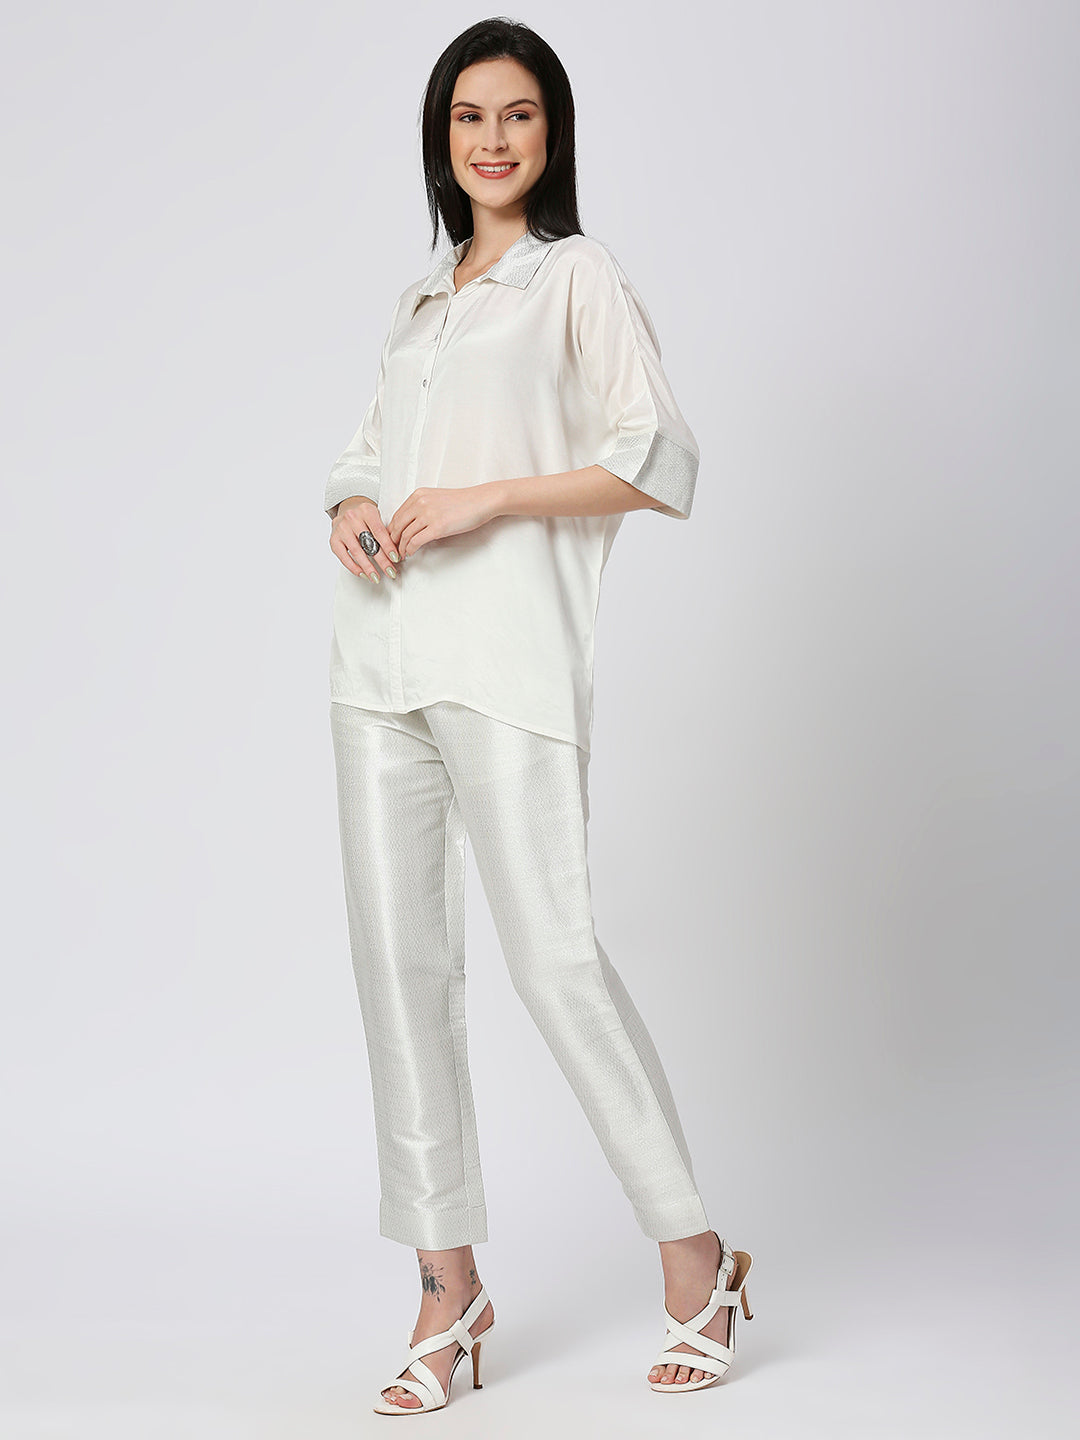 White Solid Viscose Top with Brocade Trims & Pant